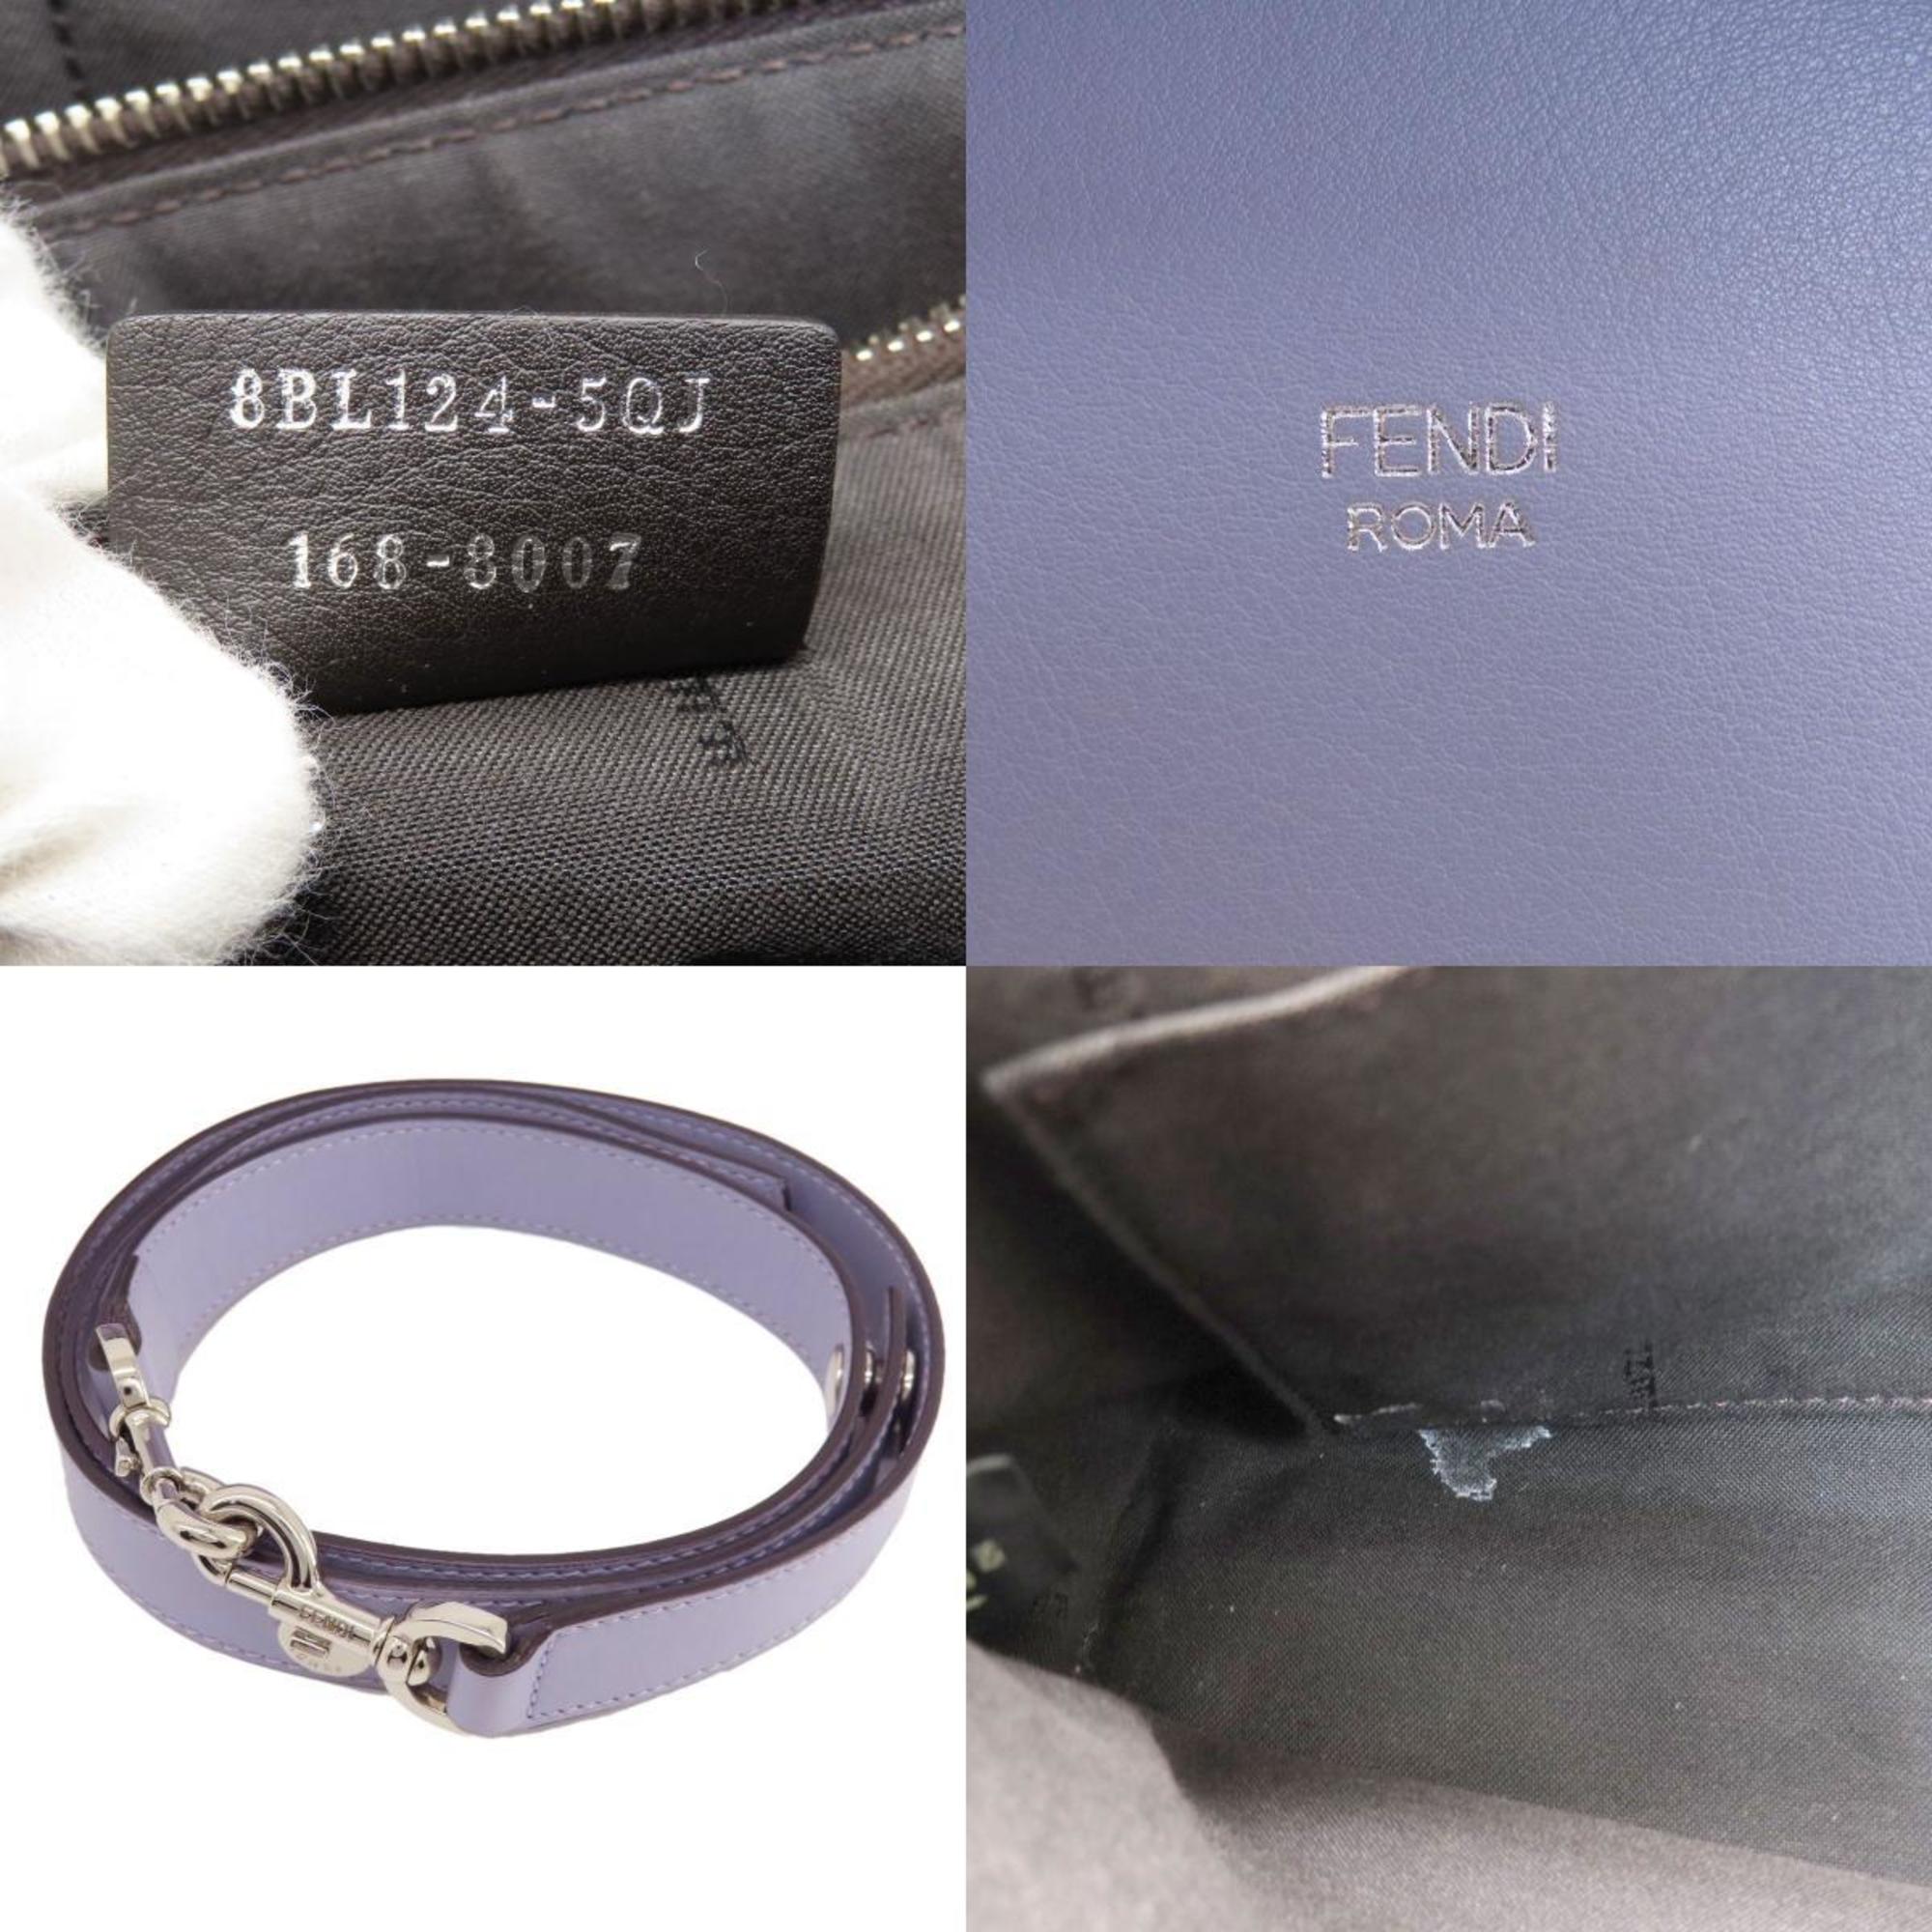 Fendi By The Way handbag in calf leather for women